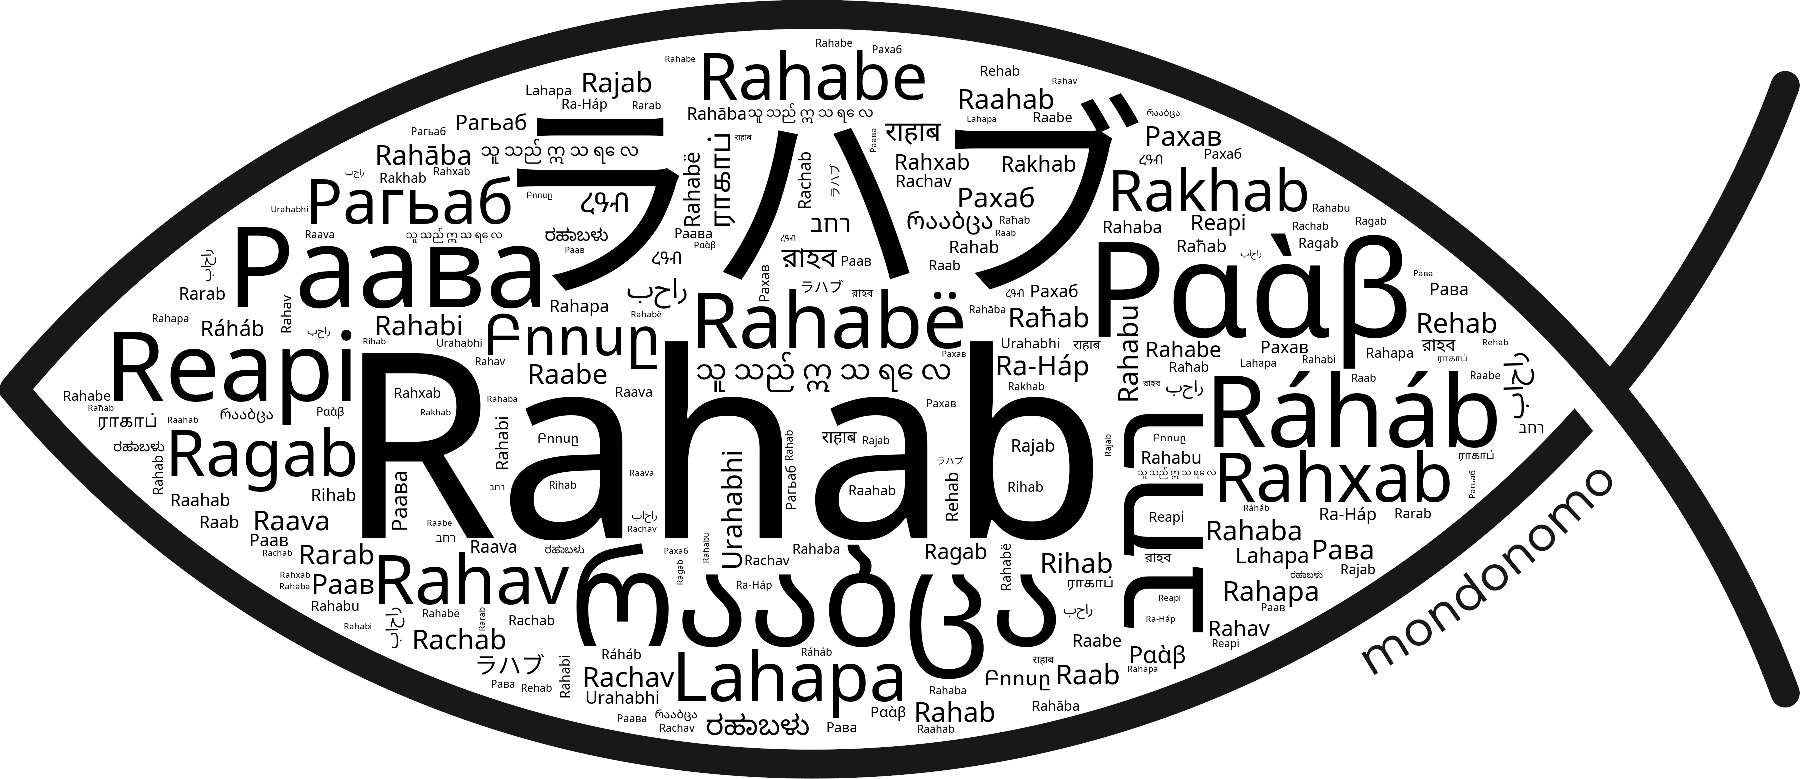 Name Rahab in the world's Bibles